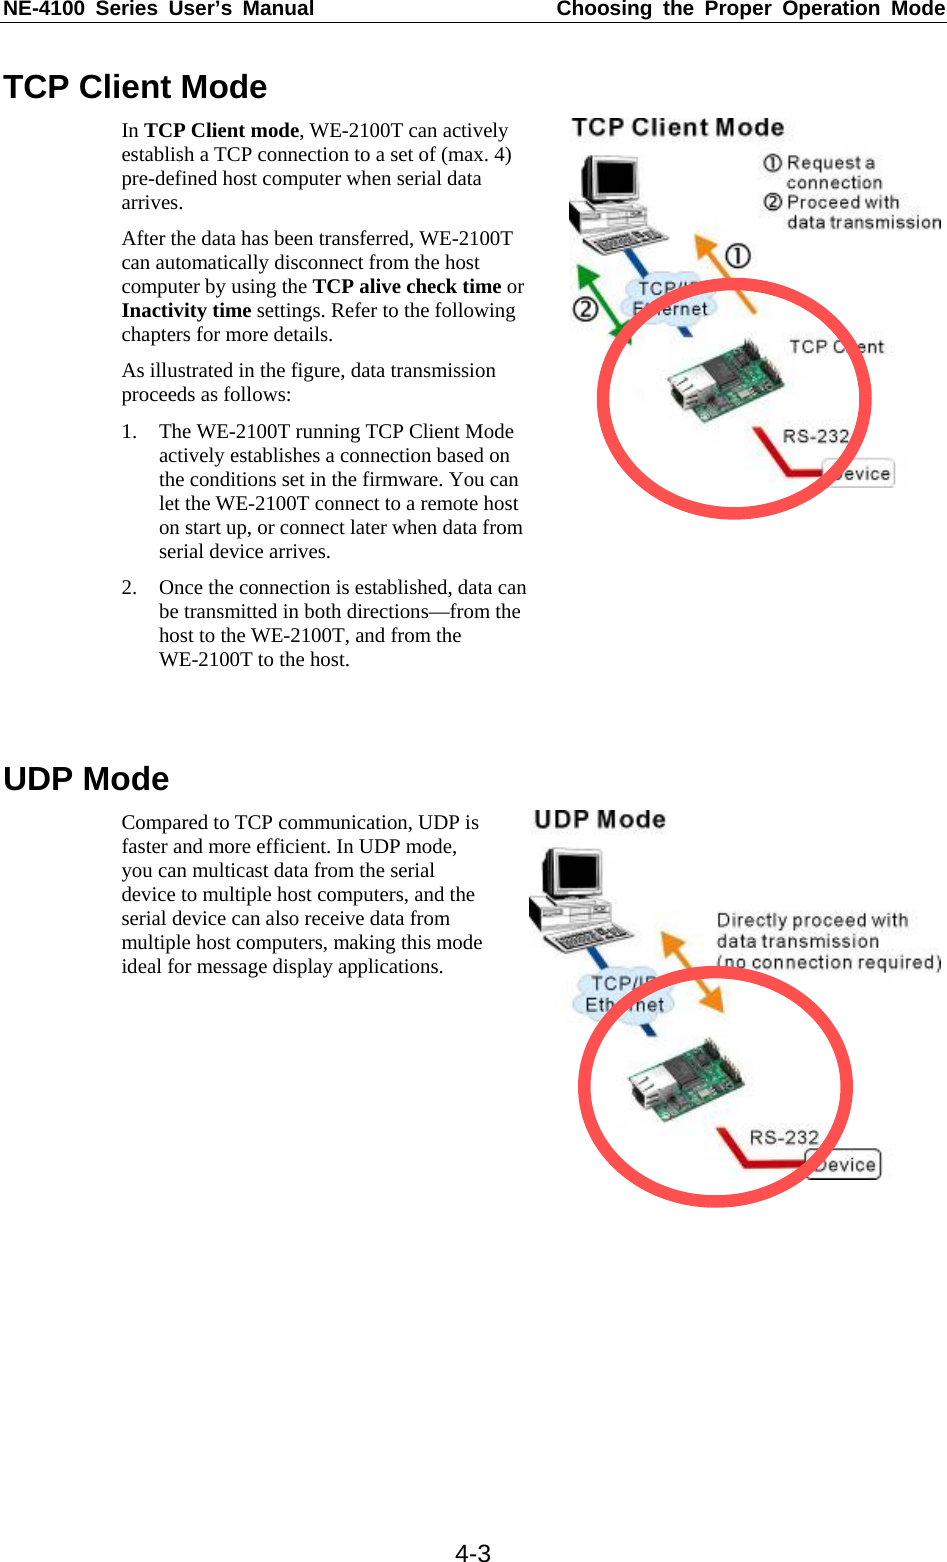 NE-4100 Series User’s Manual  Choosing the Proper Operation Mode  4-3TCP Client Mode In TCP Client mode, WE-2100T can actively establish a TCP connection to a set of (max. 4) pre-defined host computer when serial data arrives. After the data has been transferred, WE-2100T can automatically disconnect from the host computer by using the TCP alive check time or Inactivity time settings. Refer to the following chapters for more details. As illustrated in the figure, data transmission proceeds as follows: 1. The WE-2100T running TCP Client Mode actively establishes a connection based on the conditions set in the firmware. You can let the WE-2100T connect to a remote host on start up, or connect later when data from serial device arrives. 2. Once the connection is established, data can be transmitted in both directions—from the host to the WE-2100T, and from the WE-2100T to the host.   UDP Mode Compared to TCP communication, UDP is faster and more efficient. In UDP mode, you can multicast data from the serial device to multiple host computers, and the serial device can also receive data from multiple host computers, making this mode ideal for message display applications.  